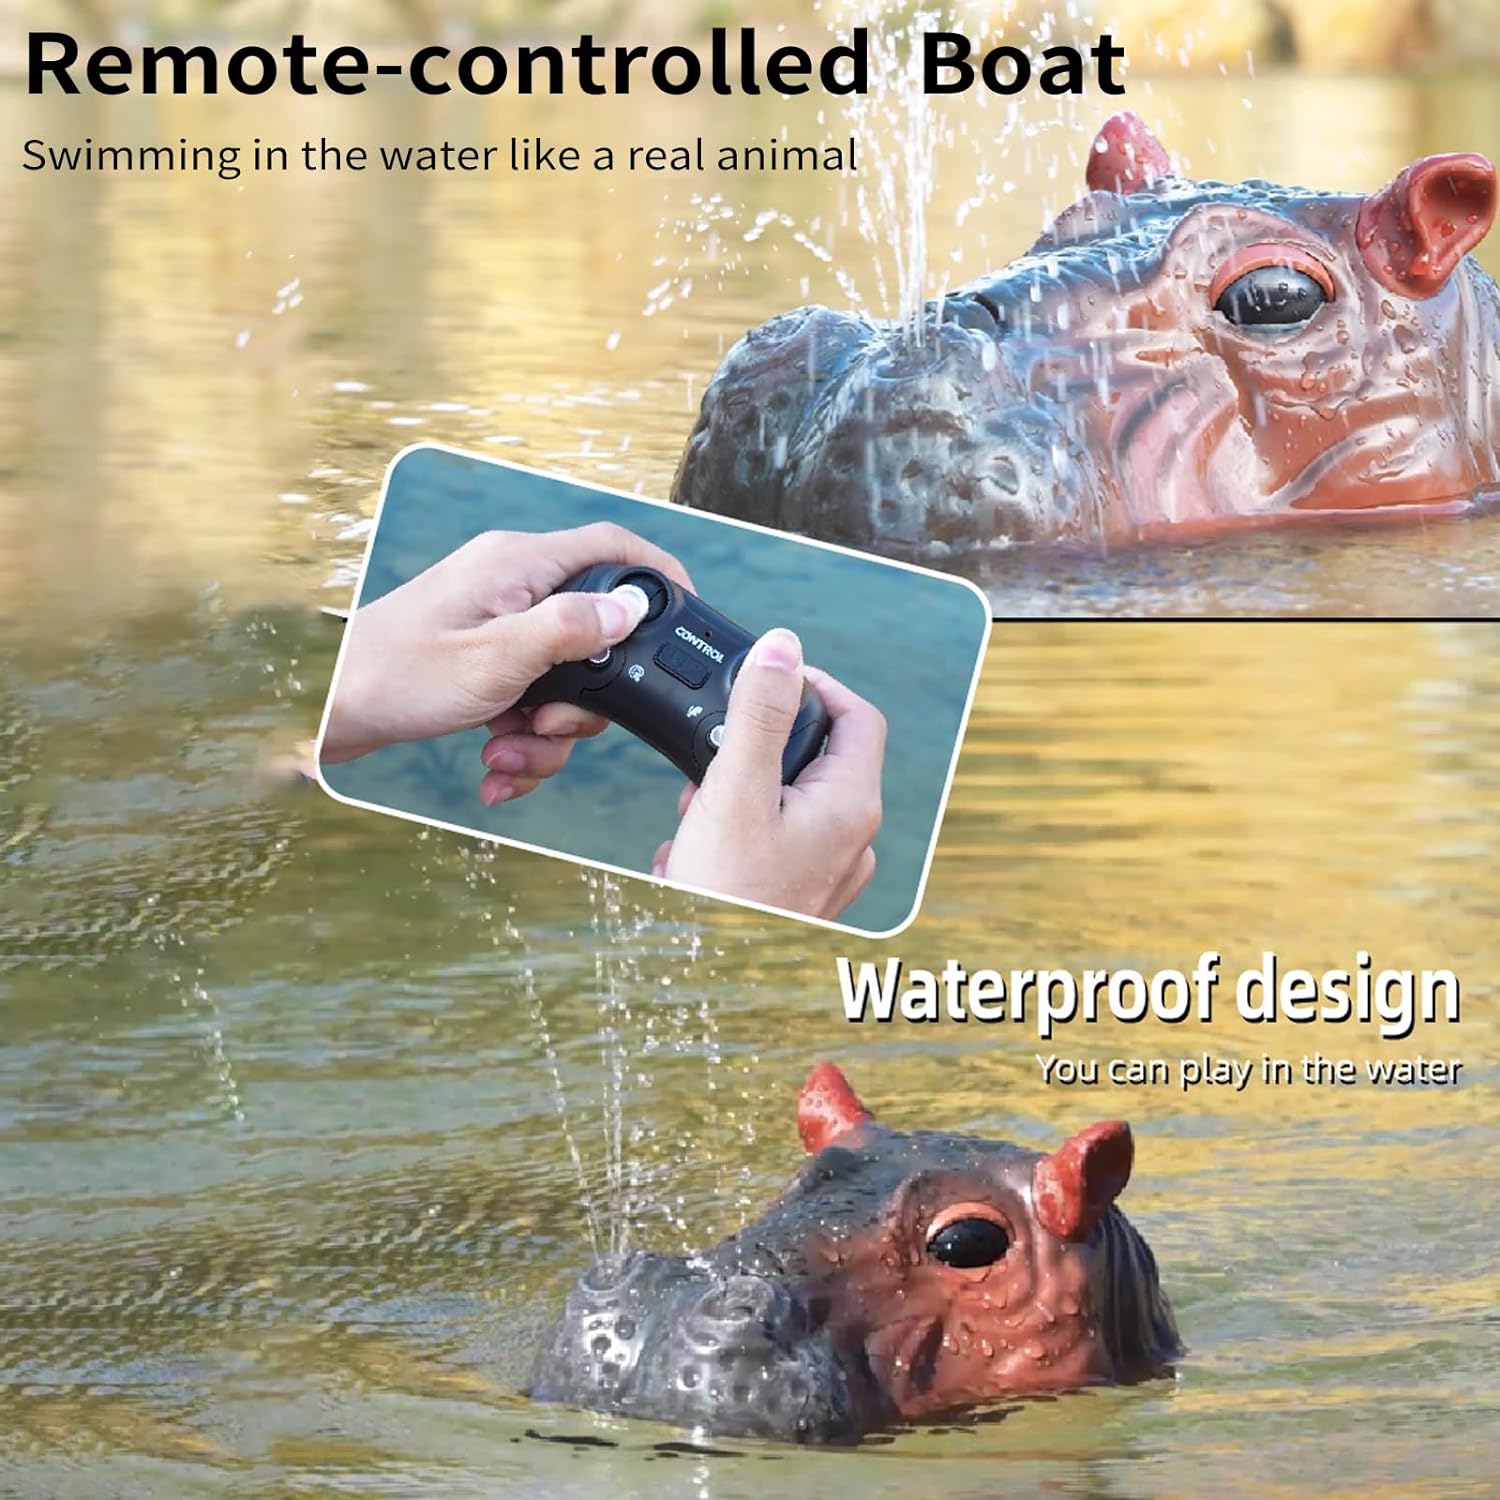 GoolRC RC Boat for Kids, Hippo Remote Control Boat for Lake River & Pool, 2.4GHz Simulation Hippopotamus Head Electric Boat Spoof Toy with Spray Water for Boys and Girls